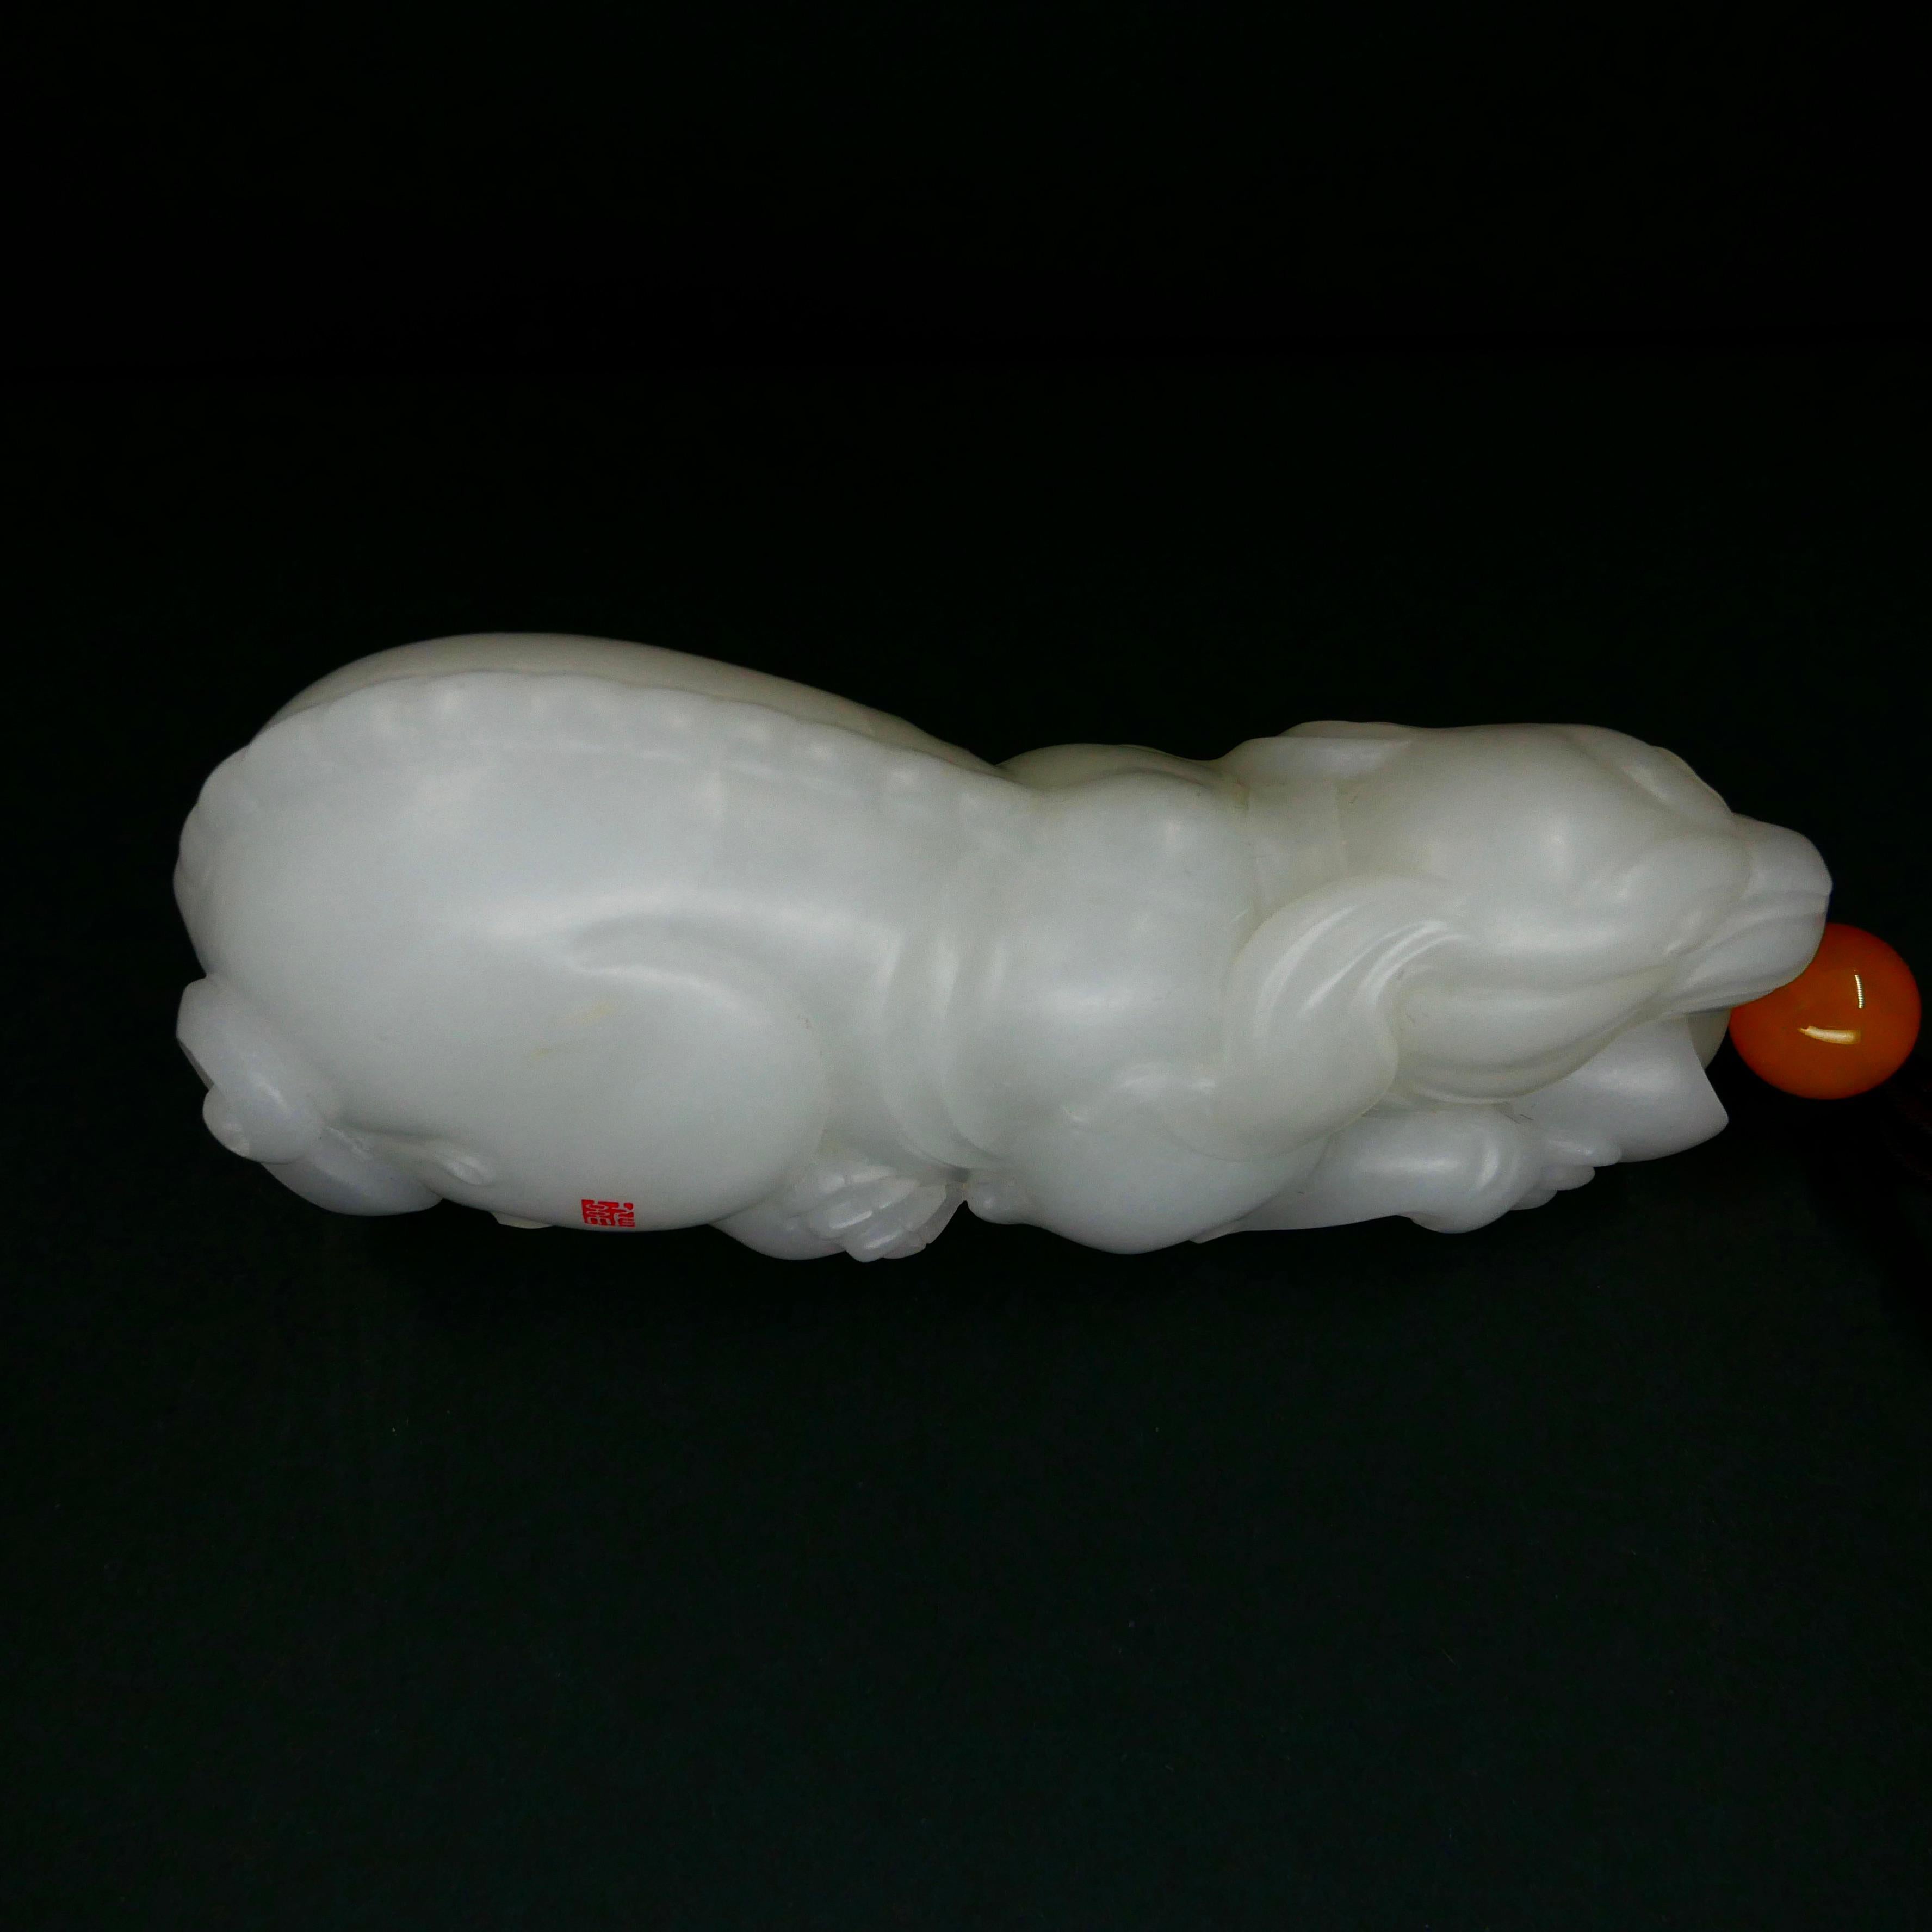 Women's or Men's Certified Nephrite White Jade Mythical Creature, Heatian River Pebble Material For Sale